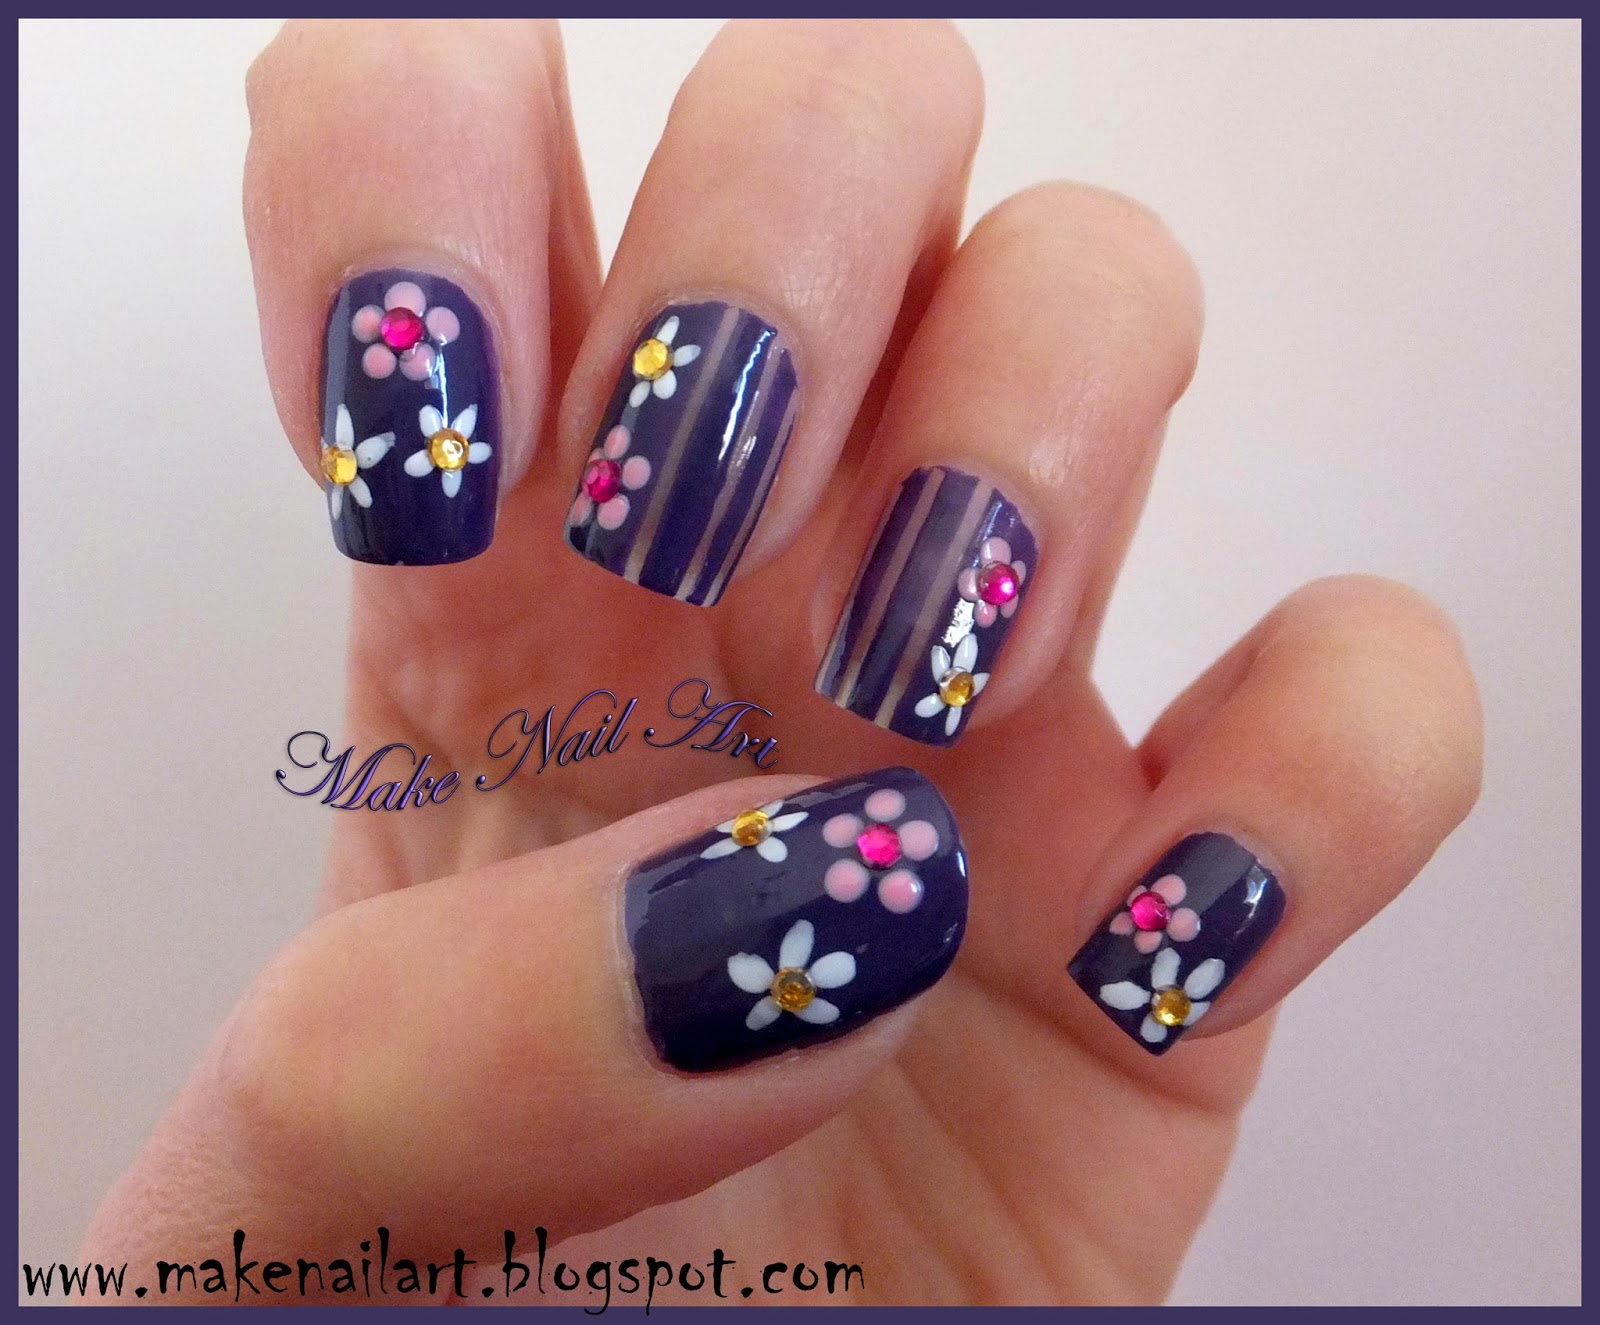 10. So Cute! 15 Floral Nail Art Ideas for Spring - wide 1